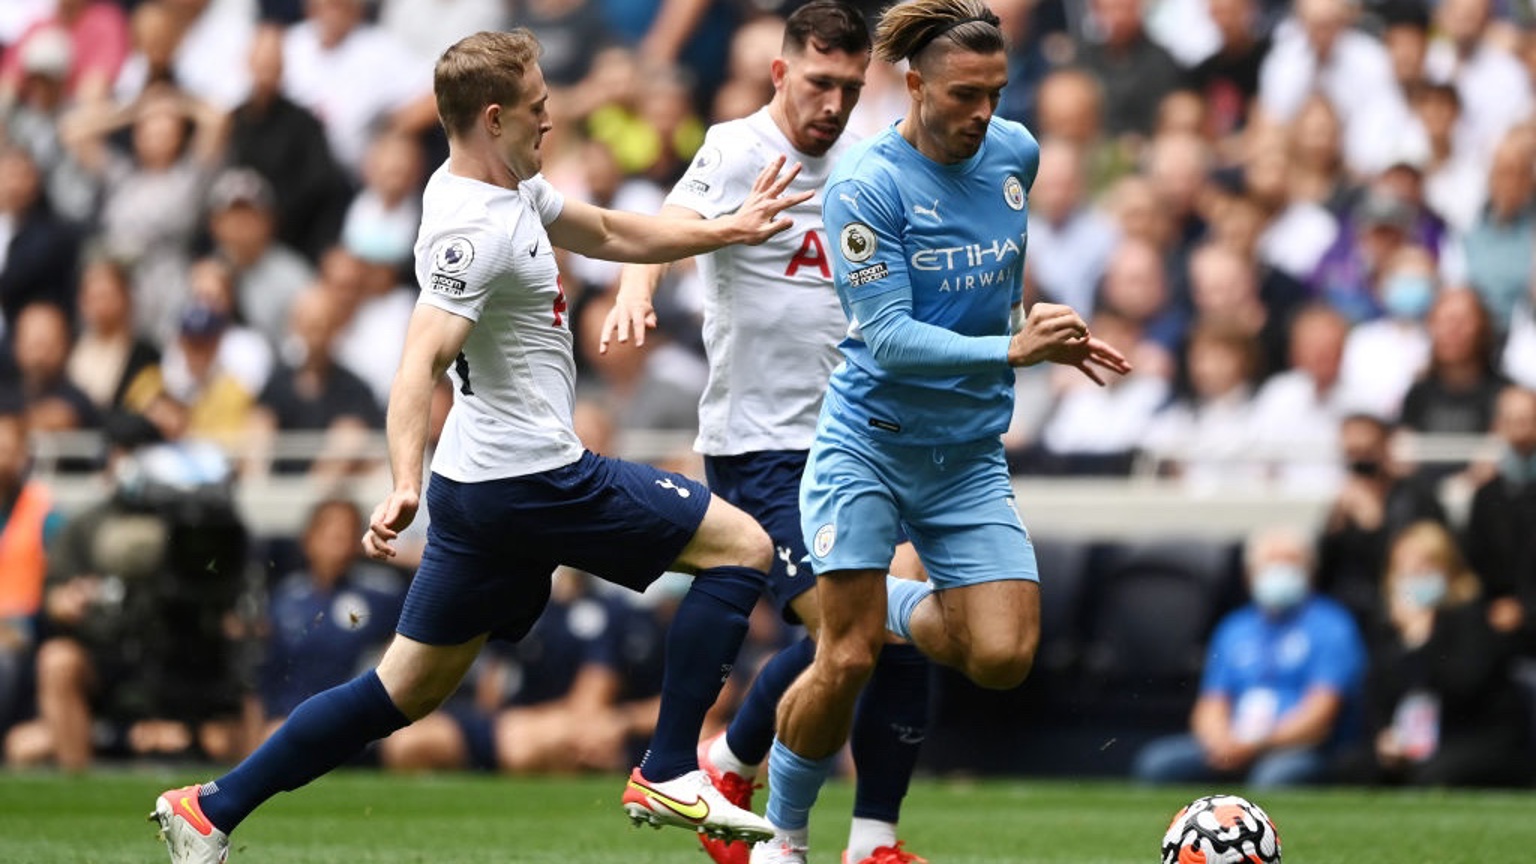 ON THE FRONT FOOT: Grealish carries City forward early on.